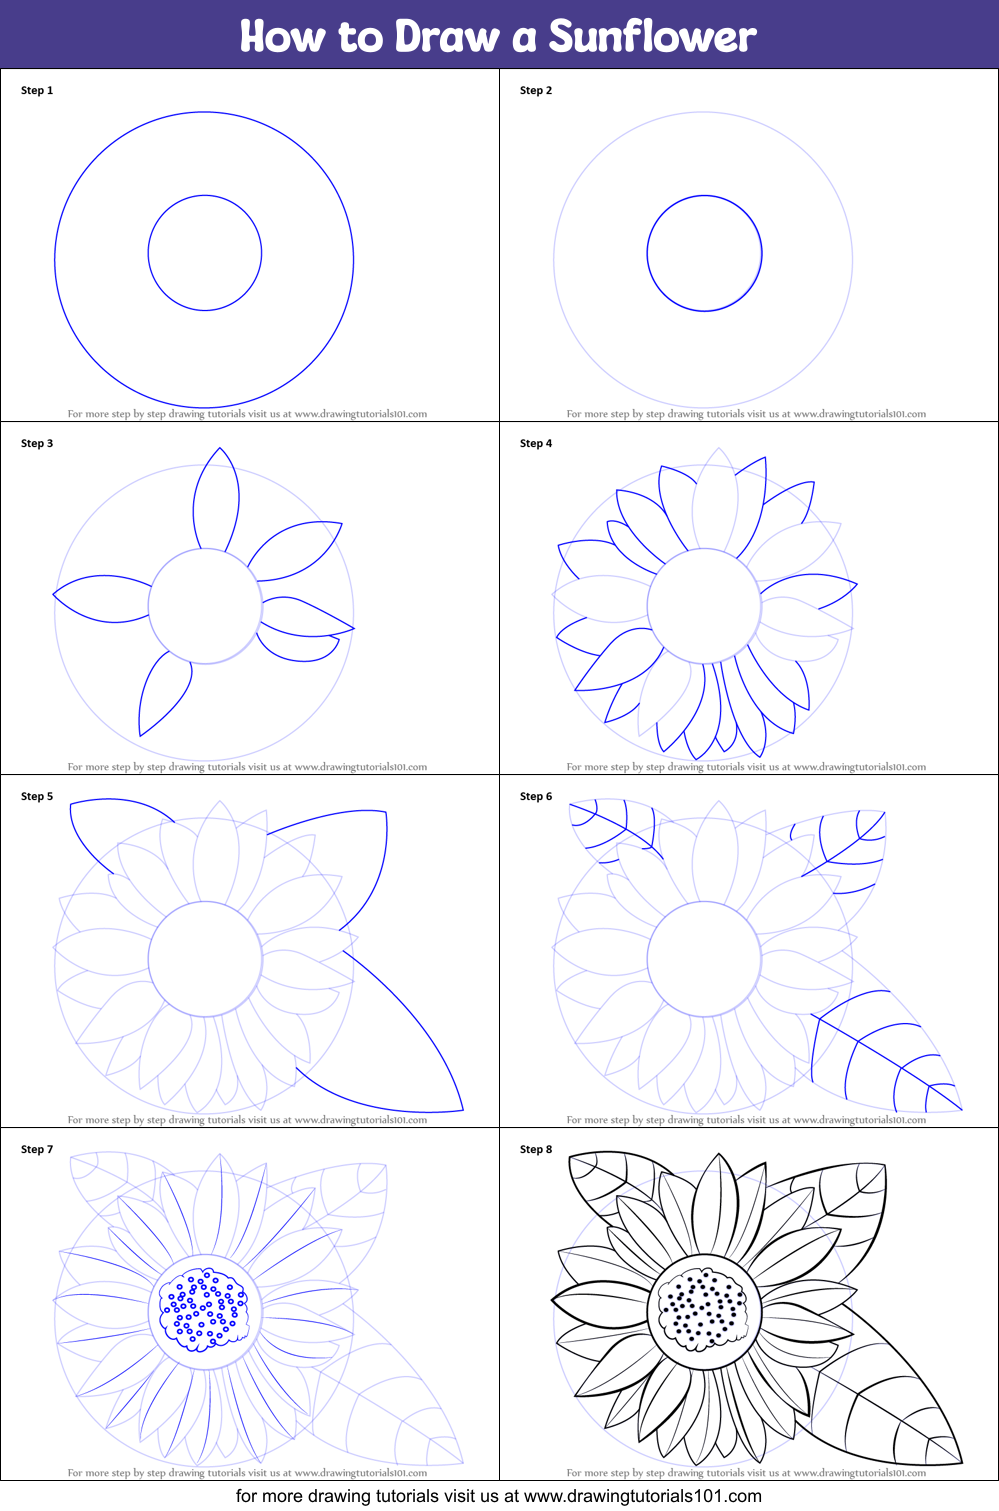 How to Draw a Sunflower printable step by step drawing sheet